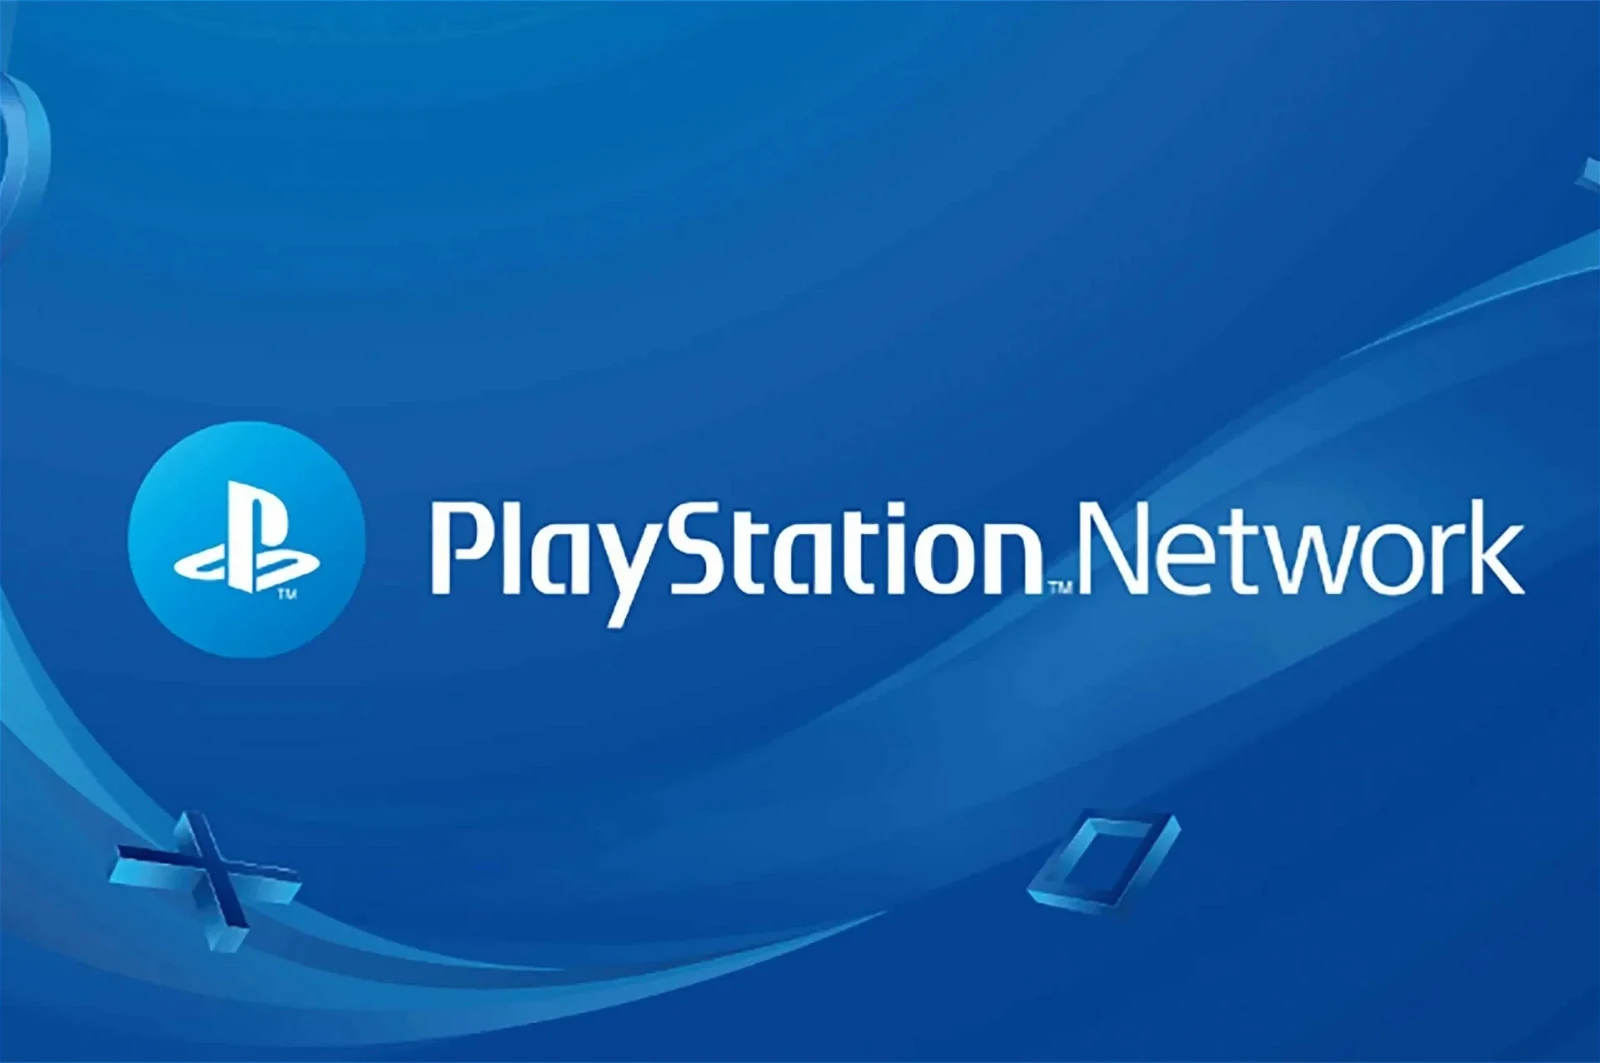 Sony's PlayStation Network